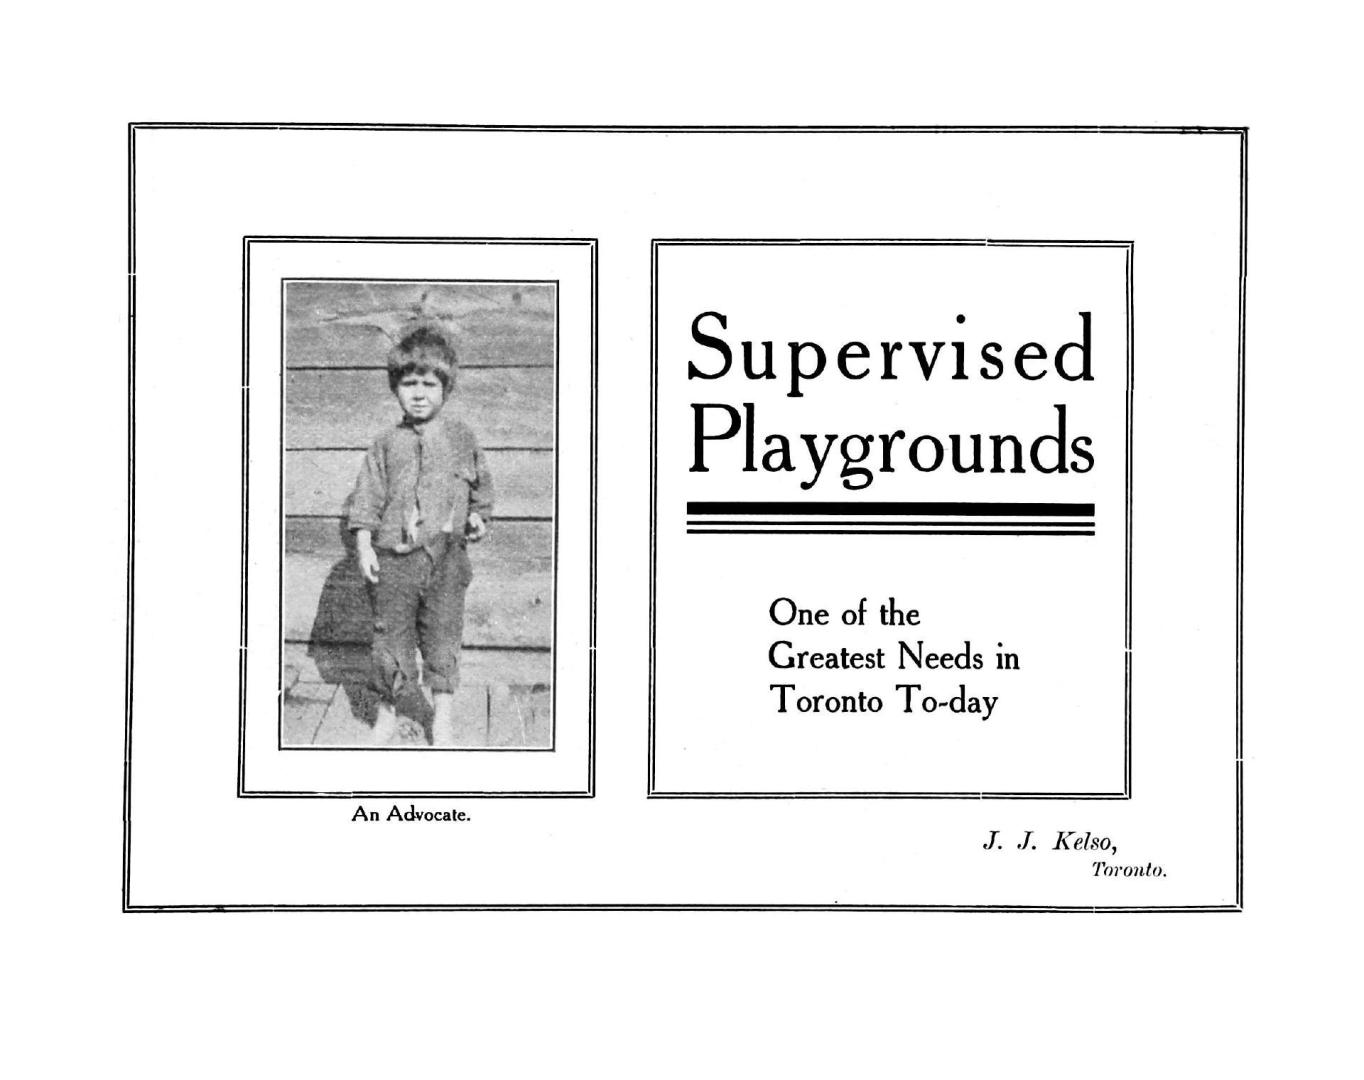 Supervised playgrounds: one of the greatest needs in Toronto to-day